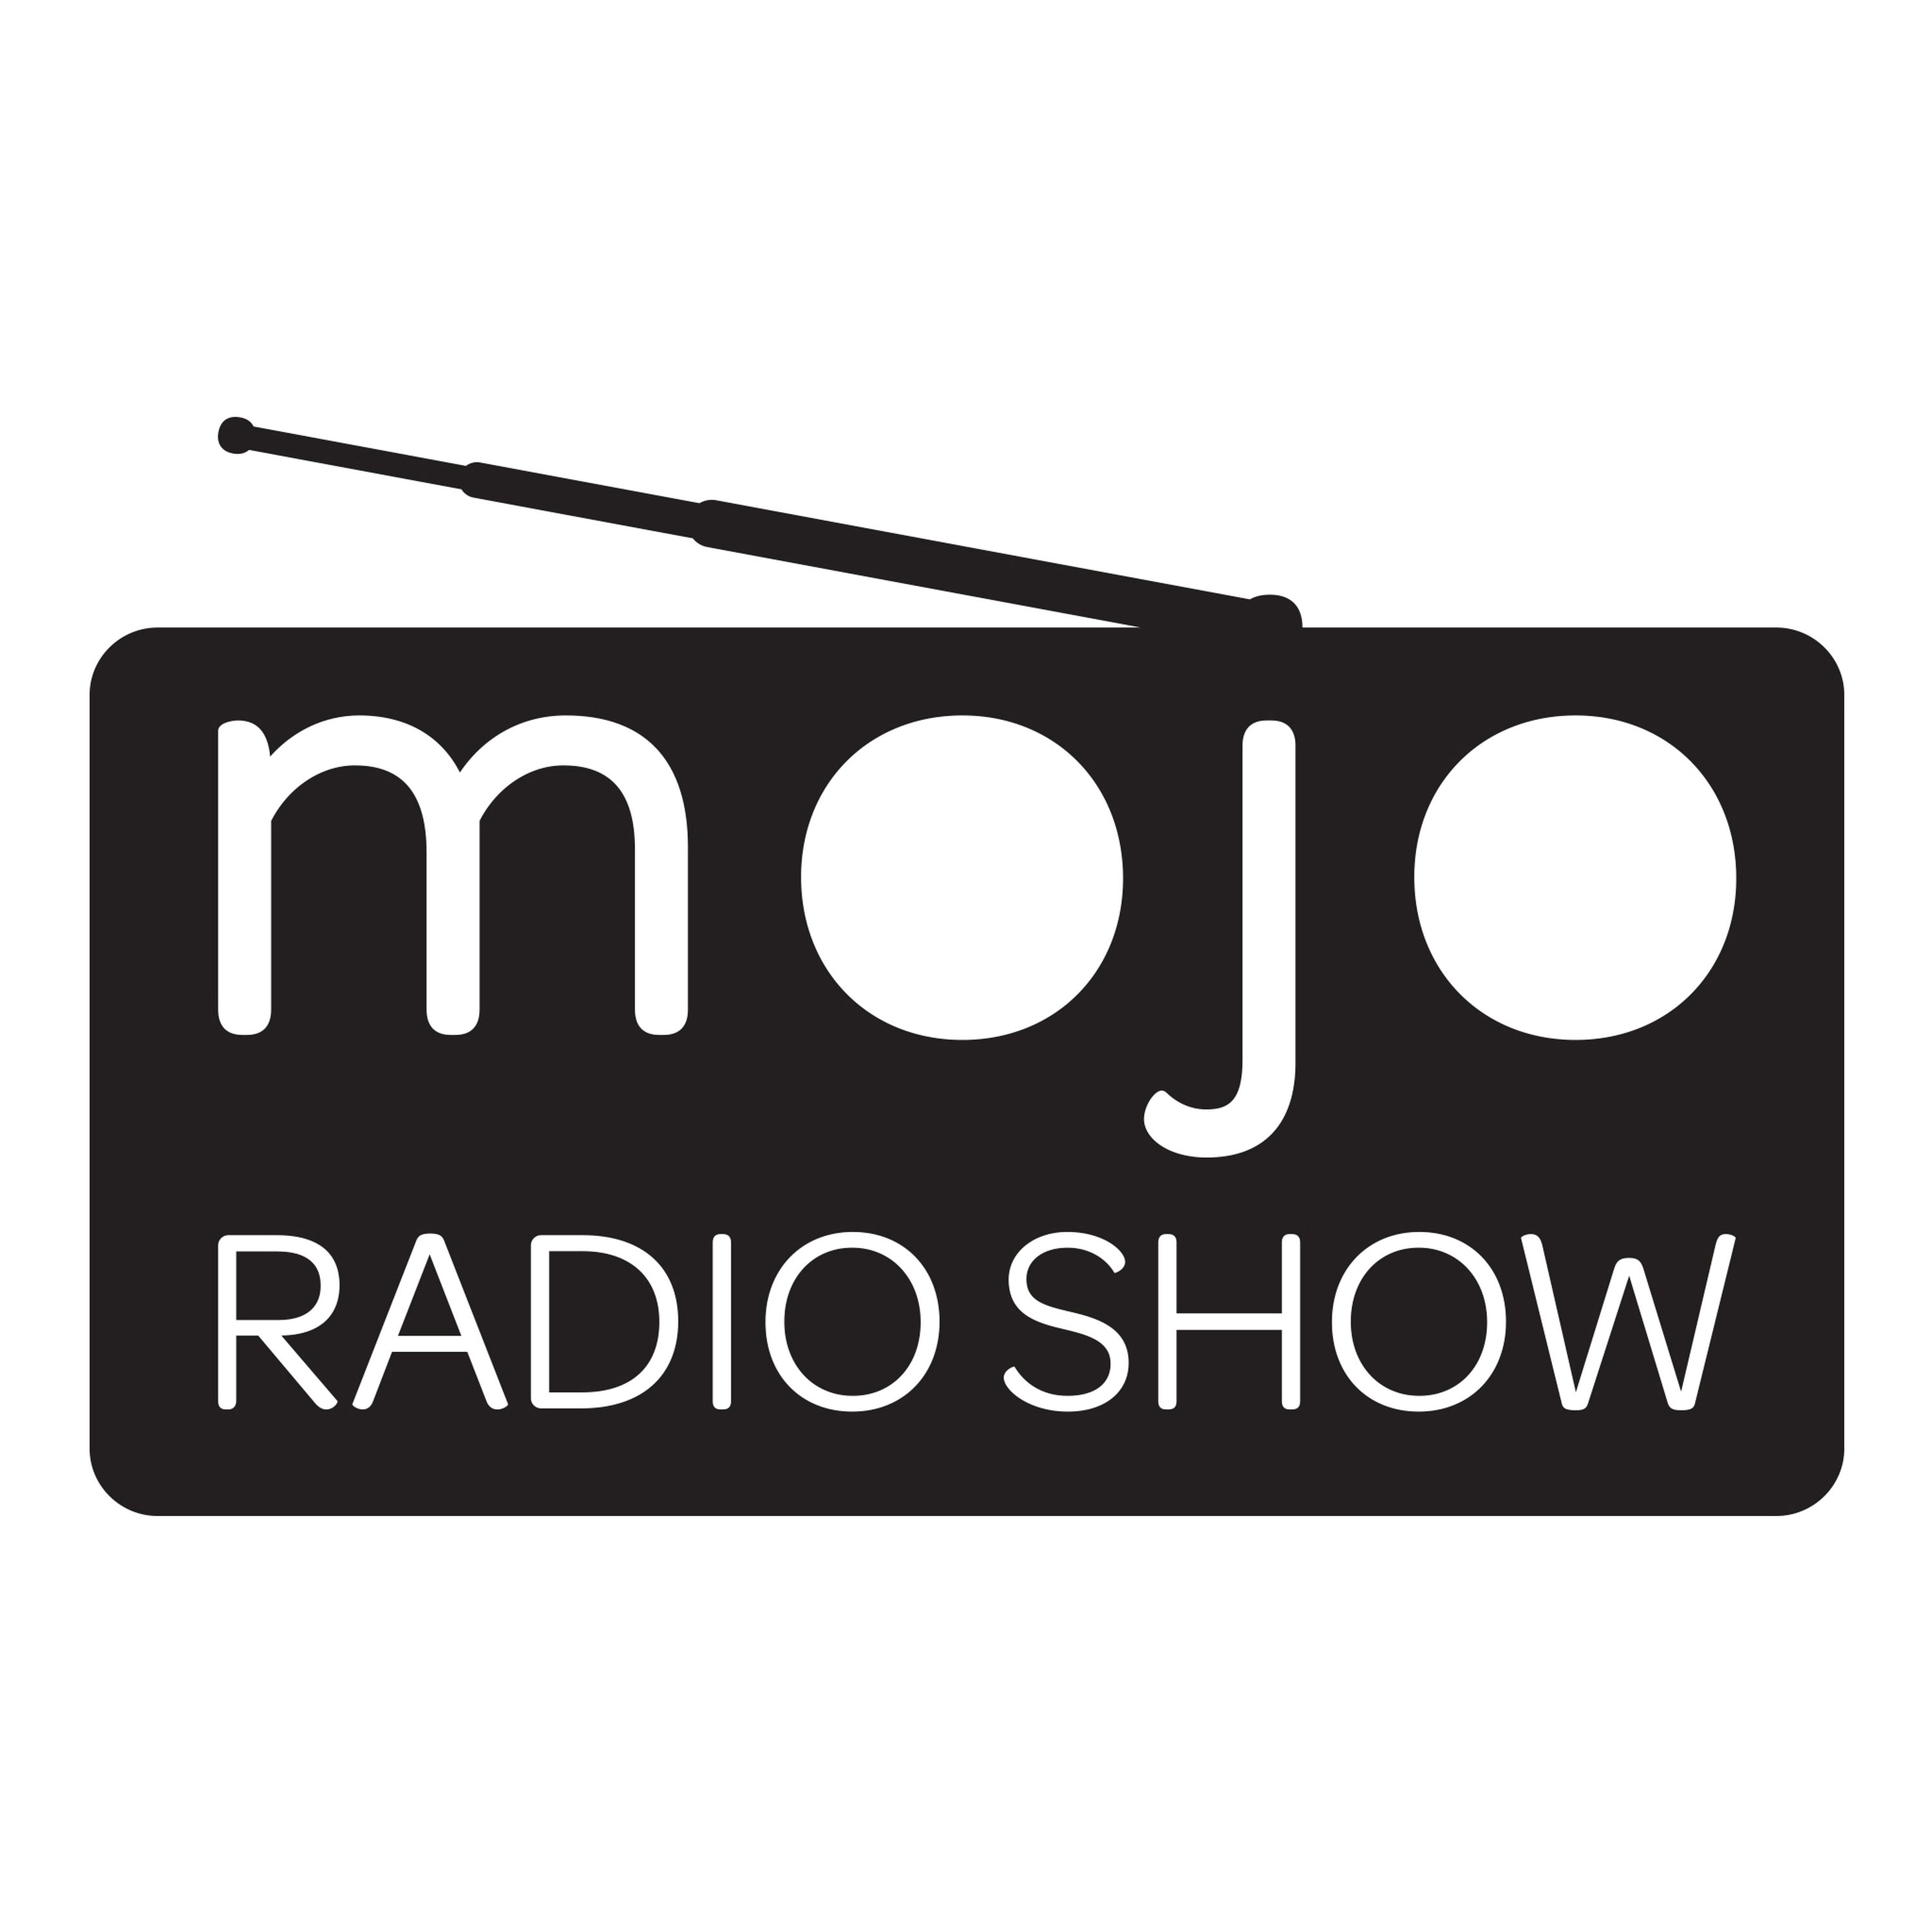 The Mojo Radio Show EP 167: How Supernormals Can Better Deal with Adversity - Dr Meg Jay